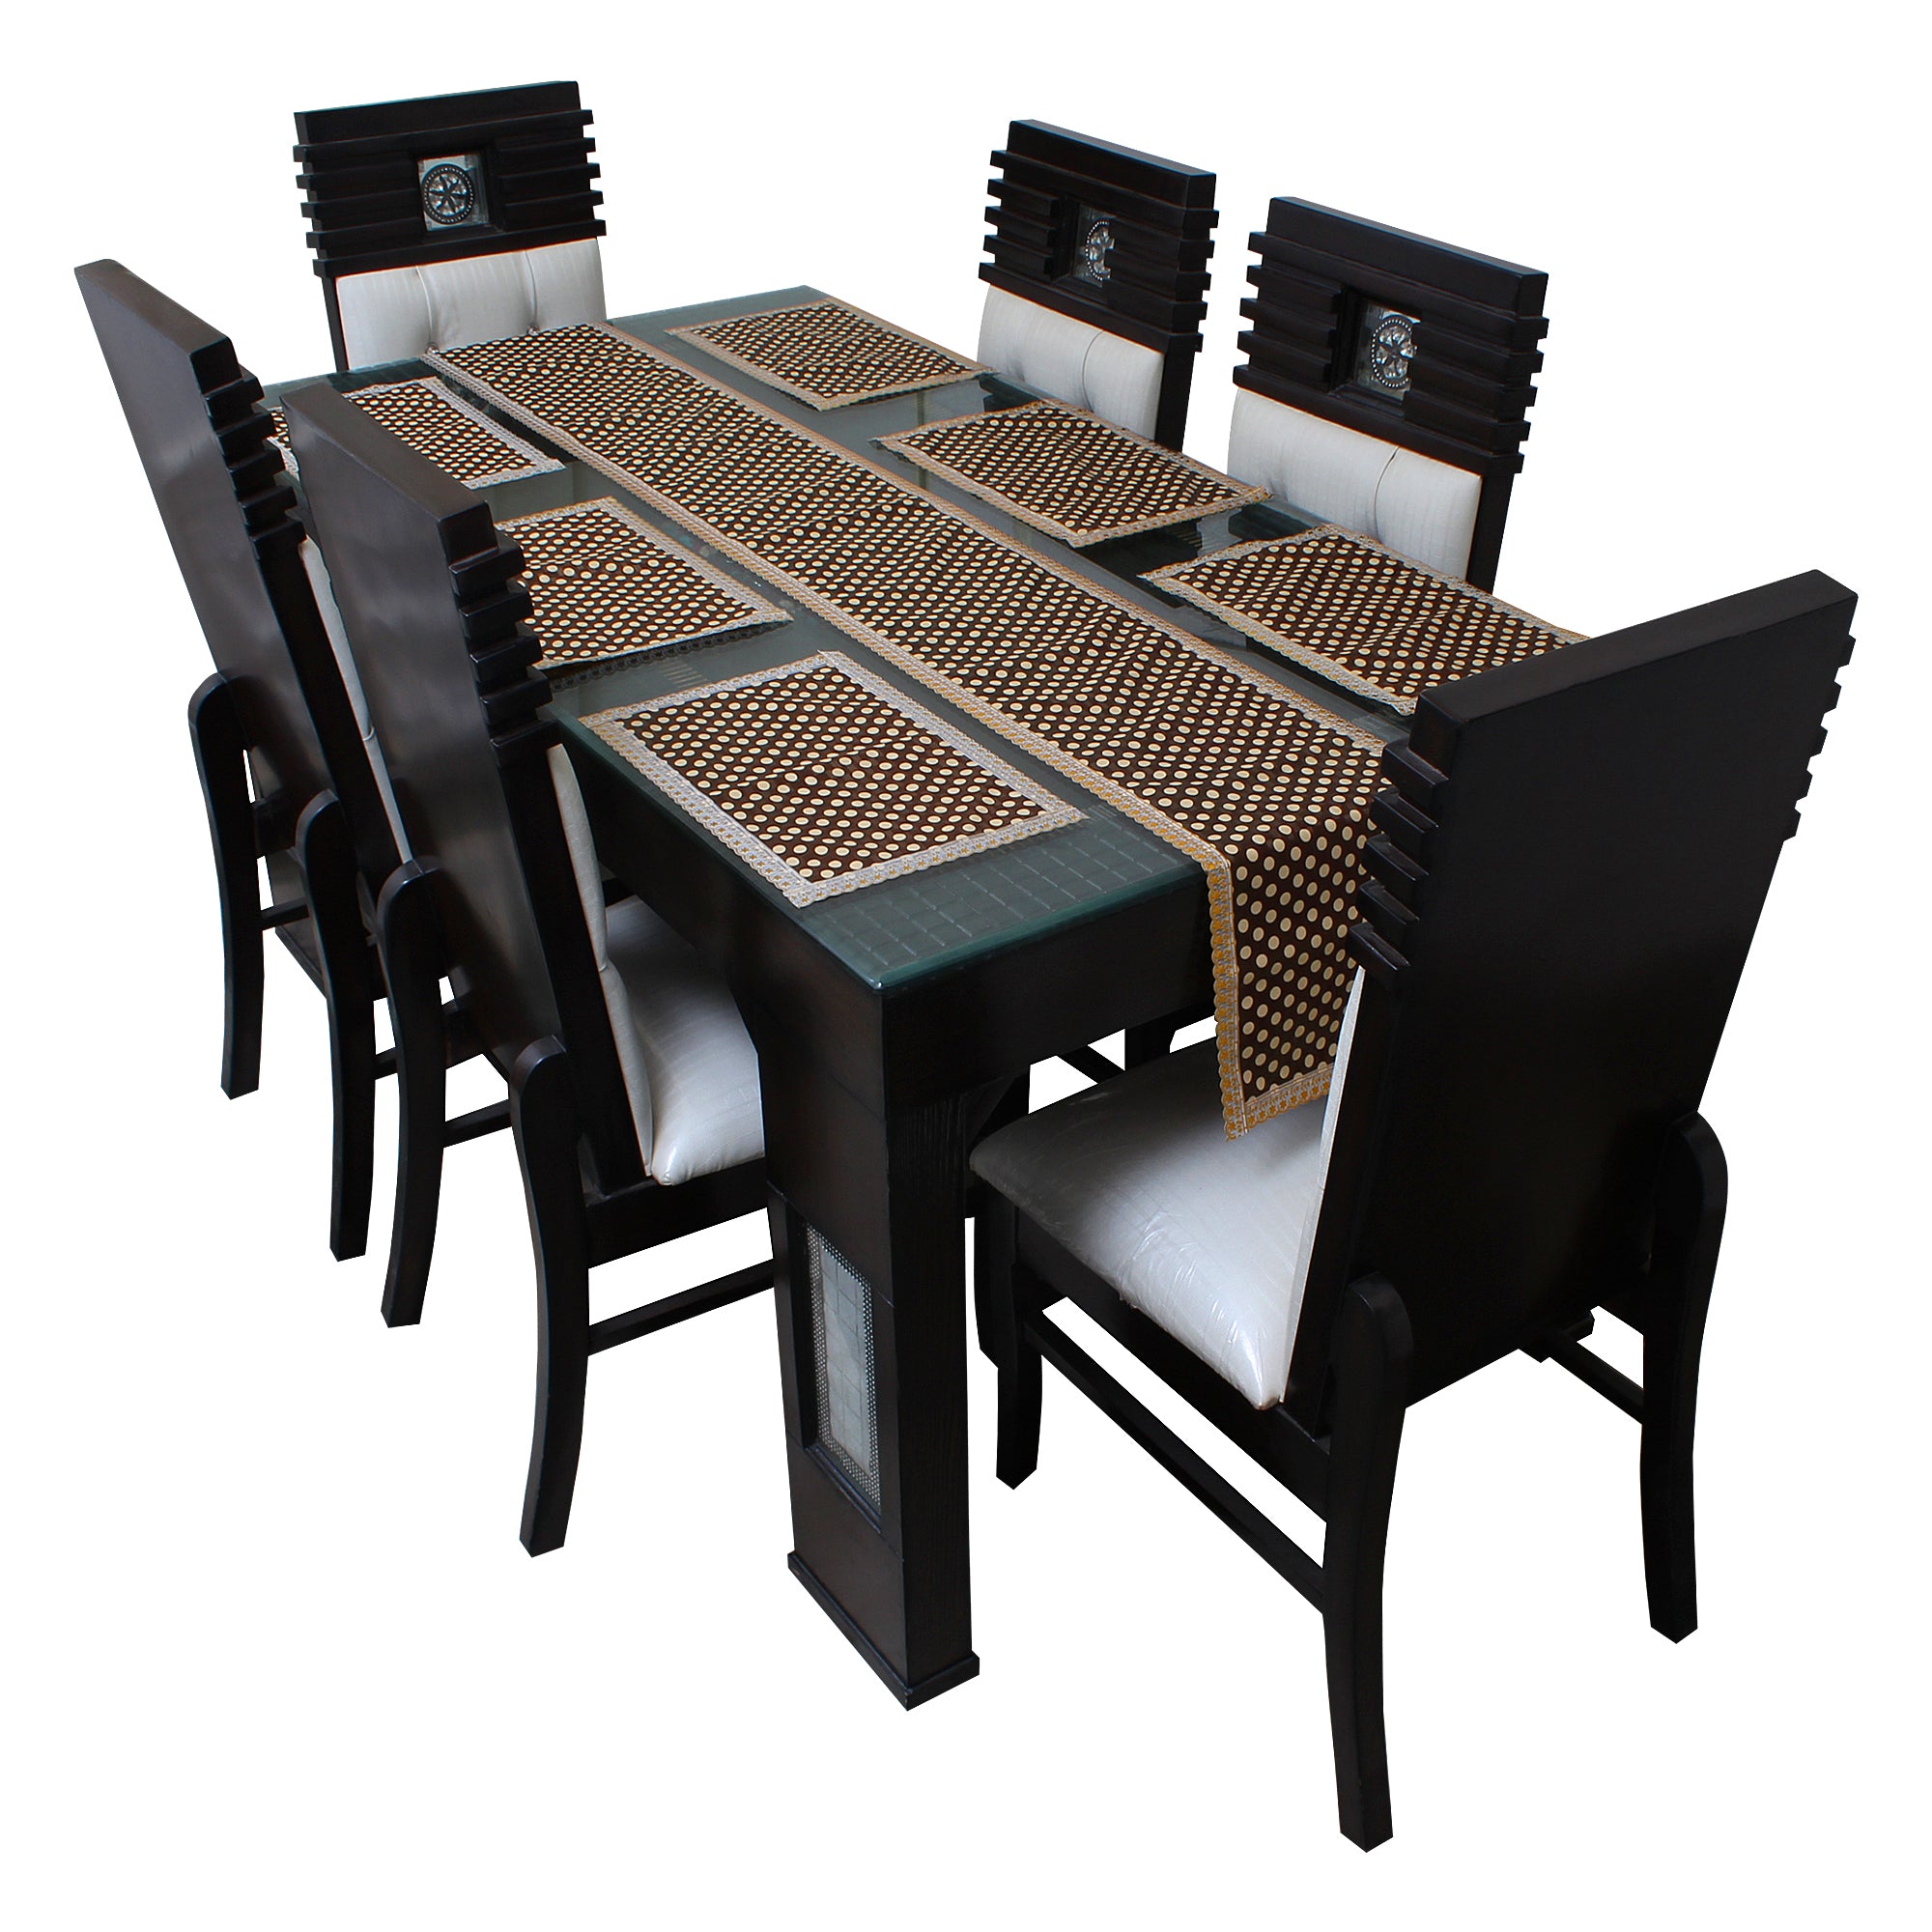 Waterproof & Dustproof Dining Table Runner With 6 Placemats, SA51 - Dream Care Furnishings Private Limited